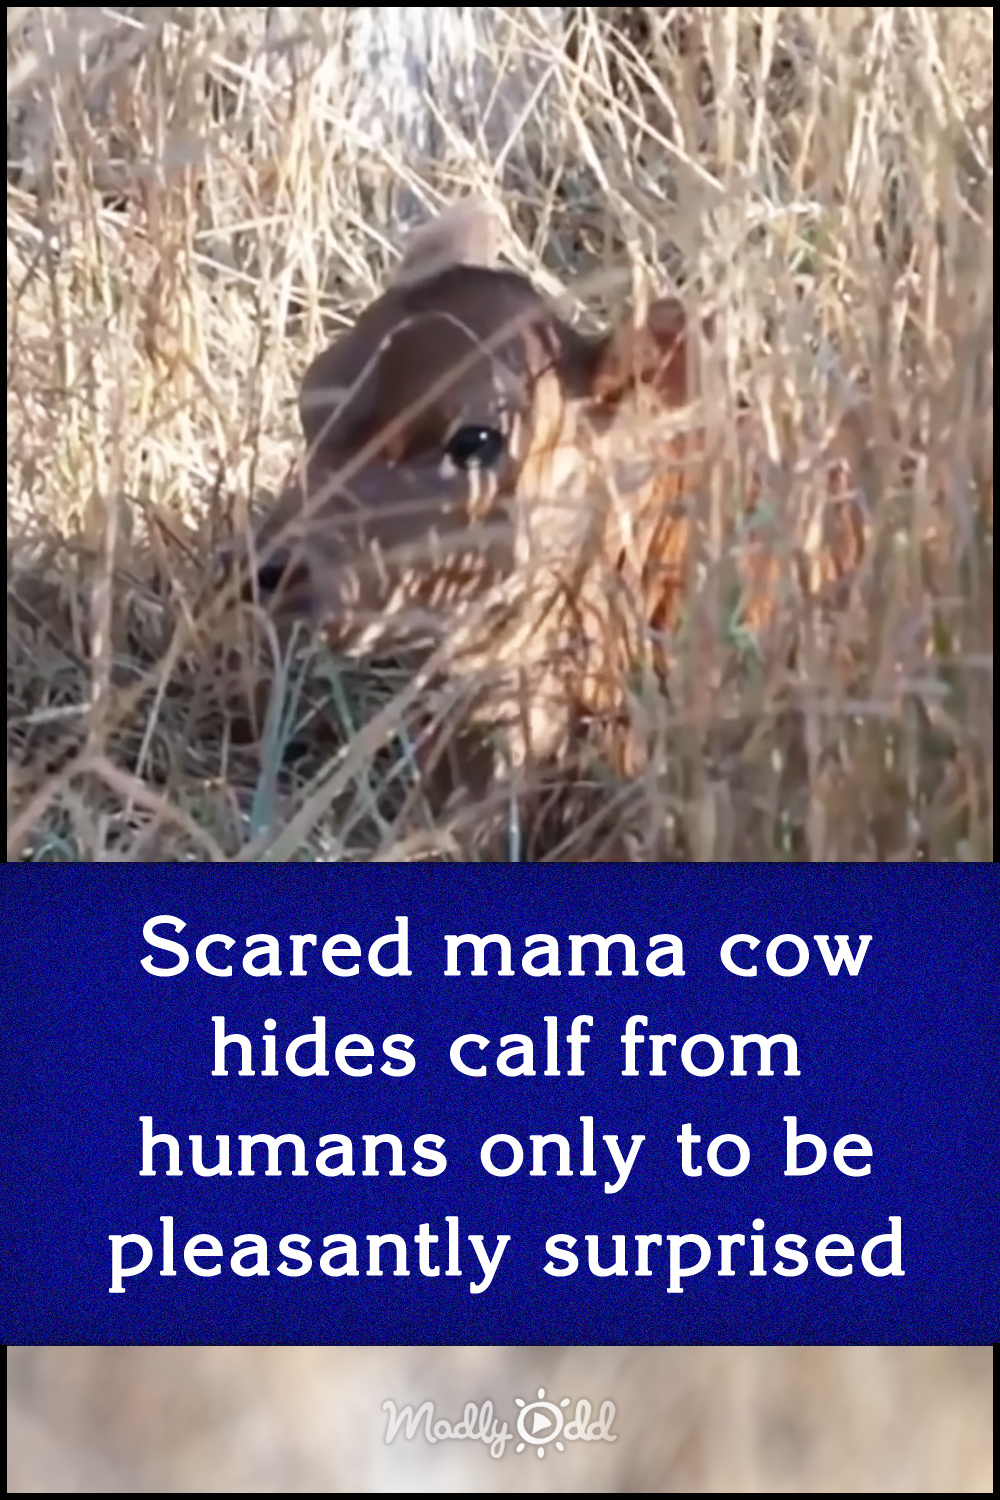 Scared mama cow hides calf from humans only to be pleasantly surprised